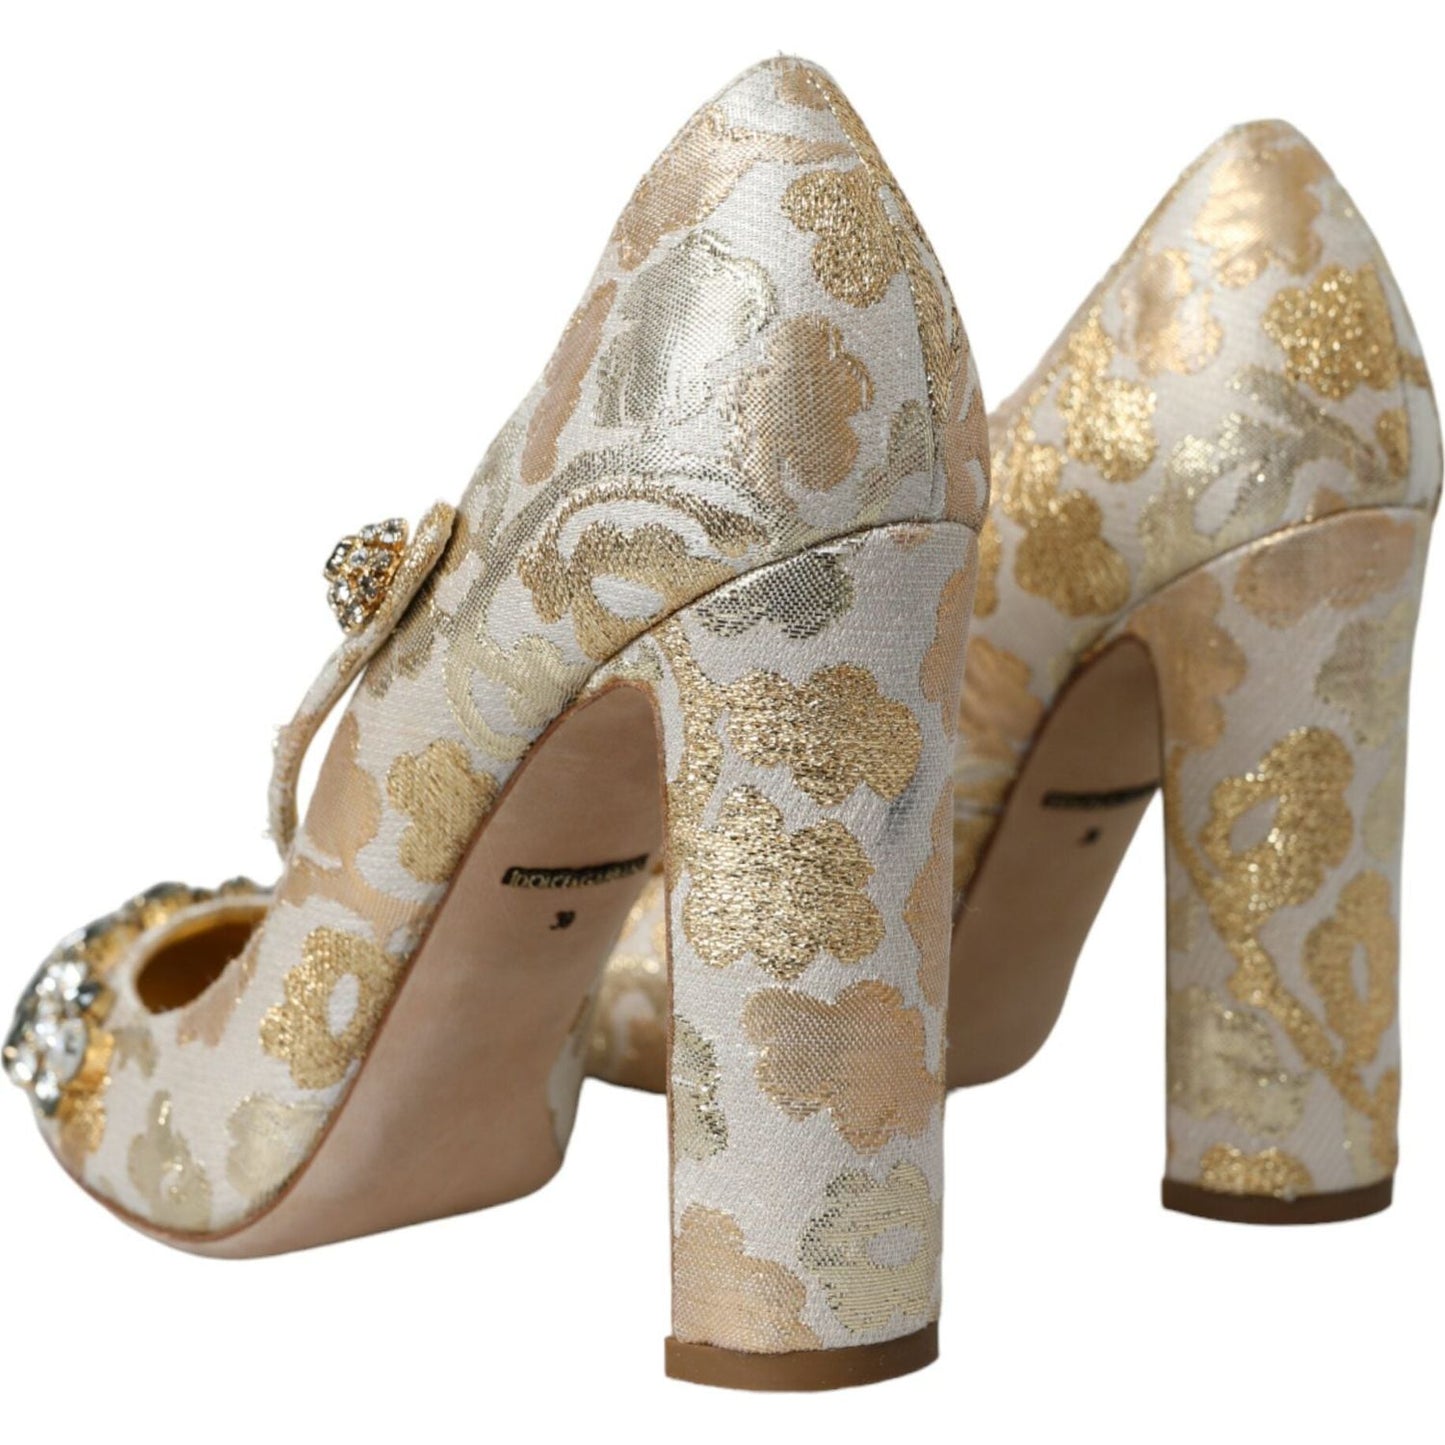 Dolce & Gabbana Gold Jacquard Crystal Mary Janes Pumps Shoes gold-jacquard-crystal-mary-janes-pumps-shoes